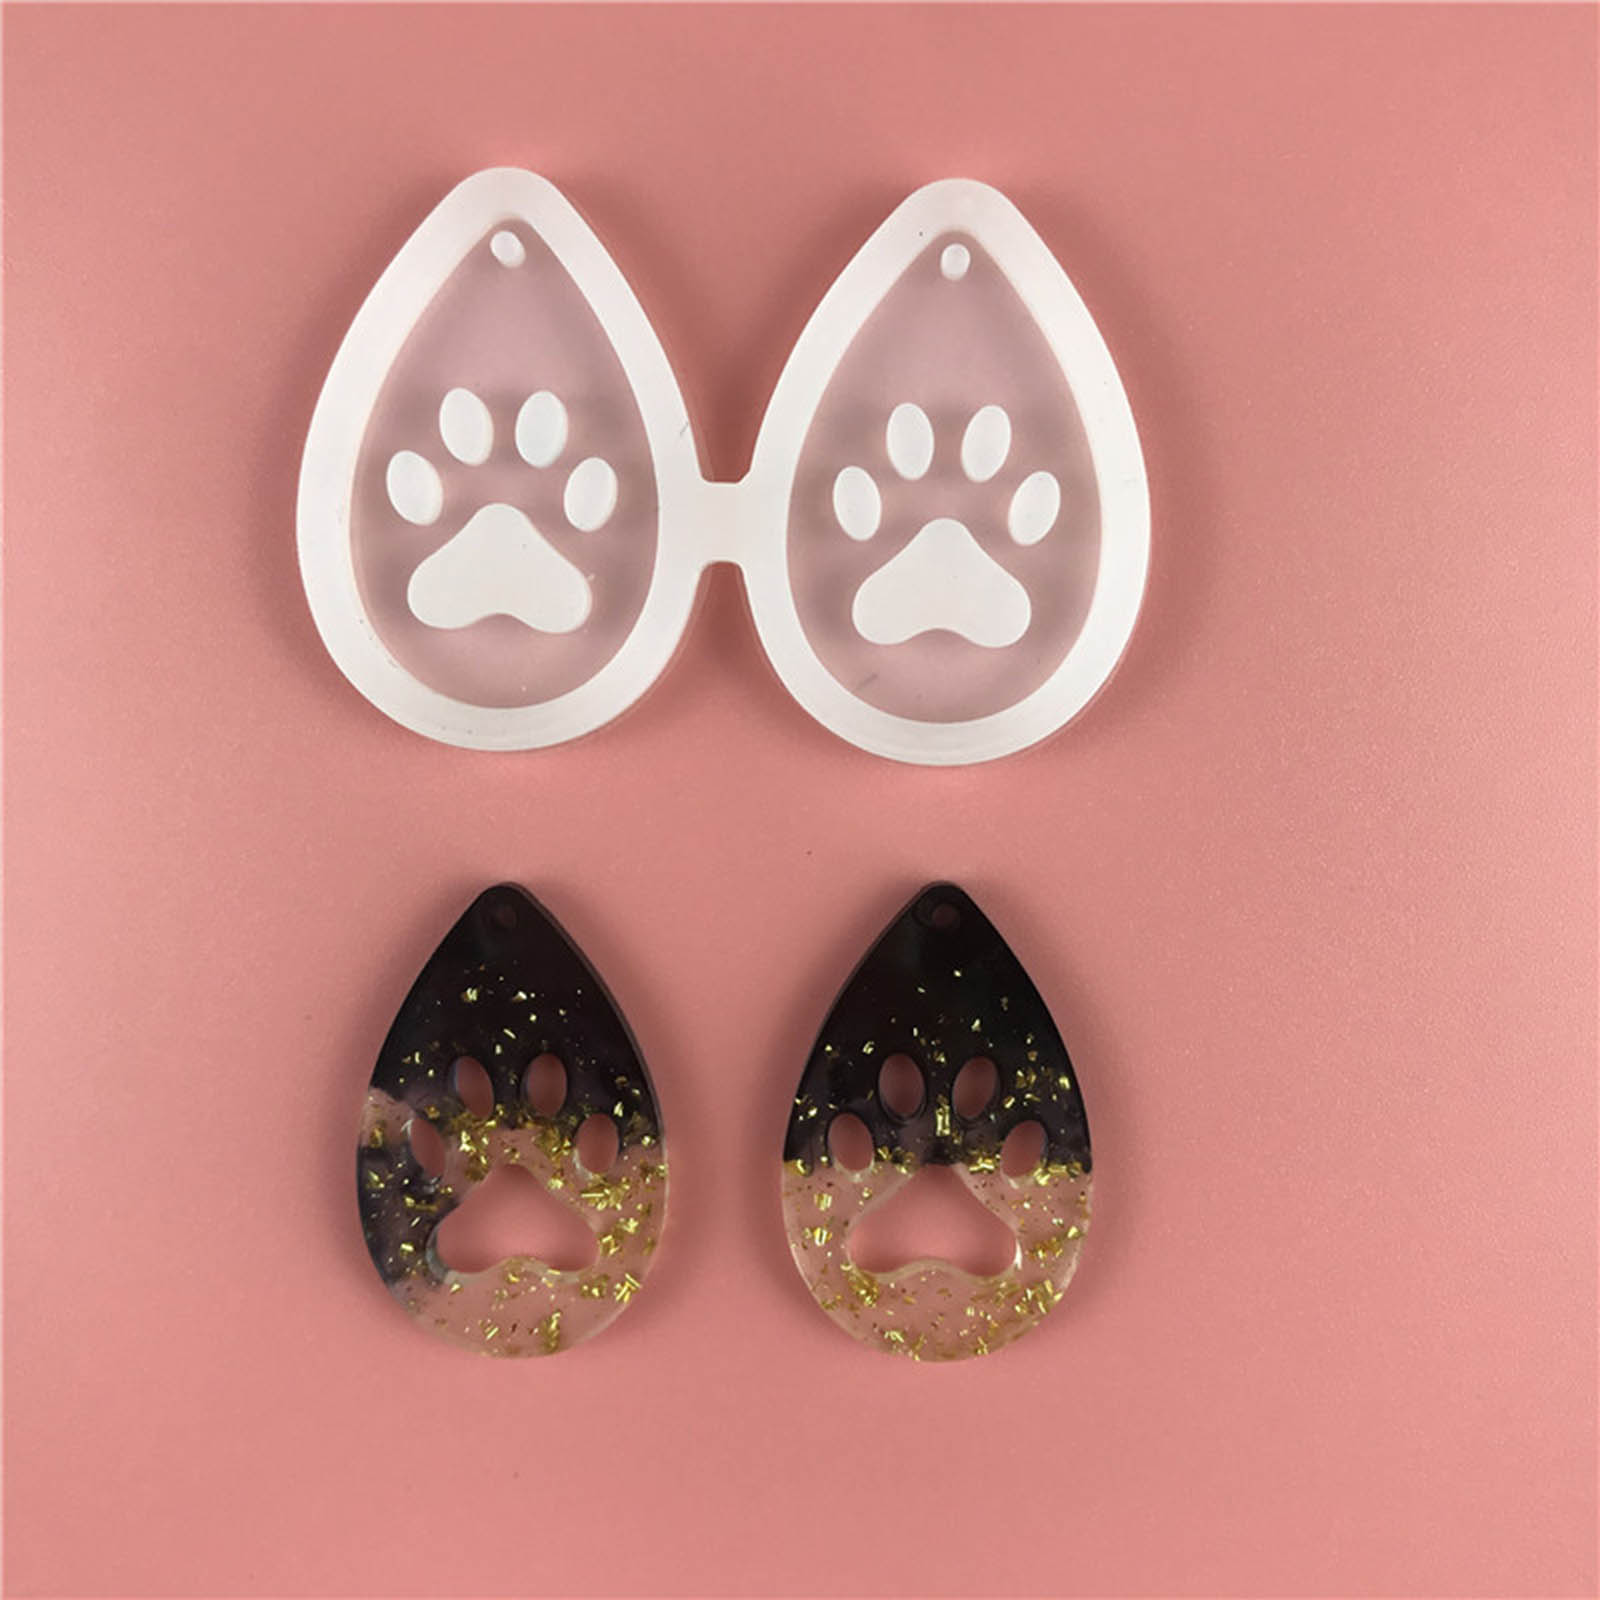 Picture of Silicone Resin Mold For Jewelry Making Earring Pendant Drop Paw Claw White 6.1cm x 4.2cm, 1 Piece